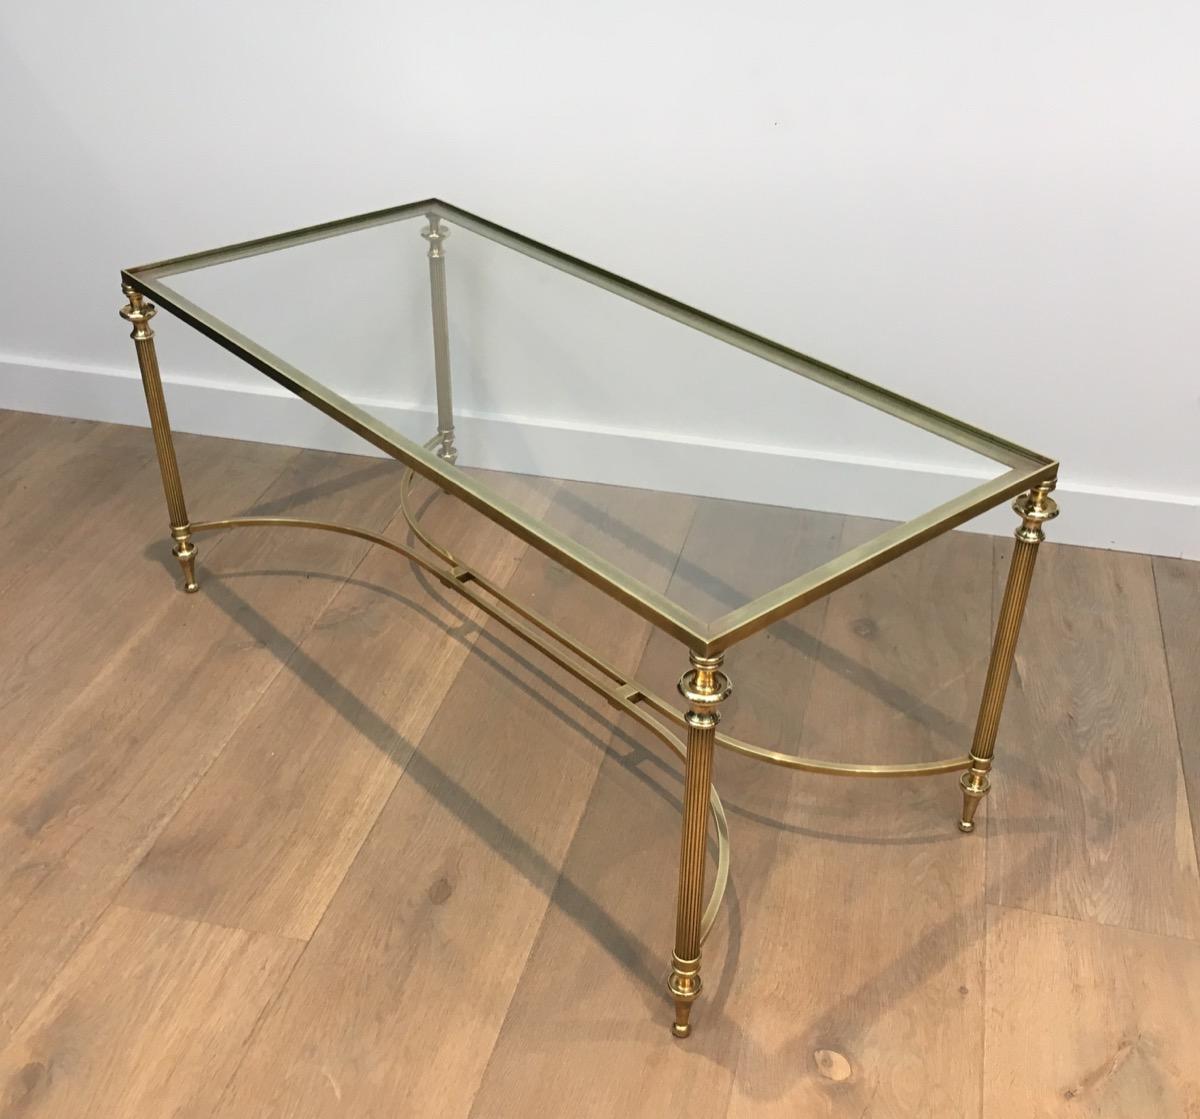 Mid-20th Century Neoclassical Brass Coffee Table with Glass Top, French, circa 1940